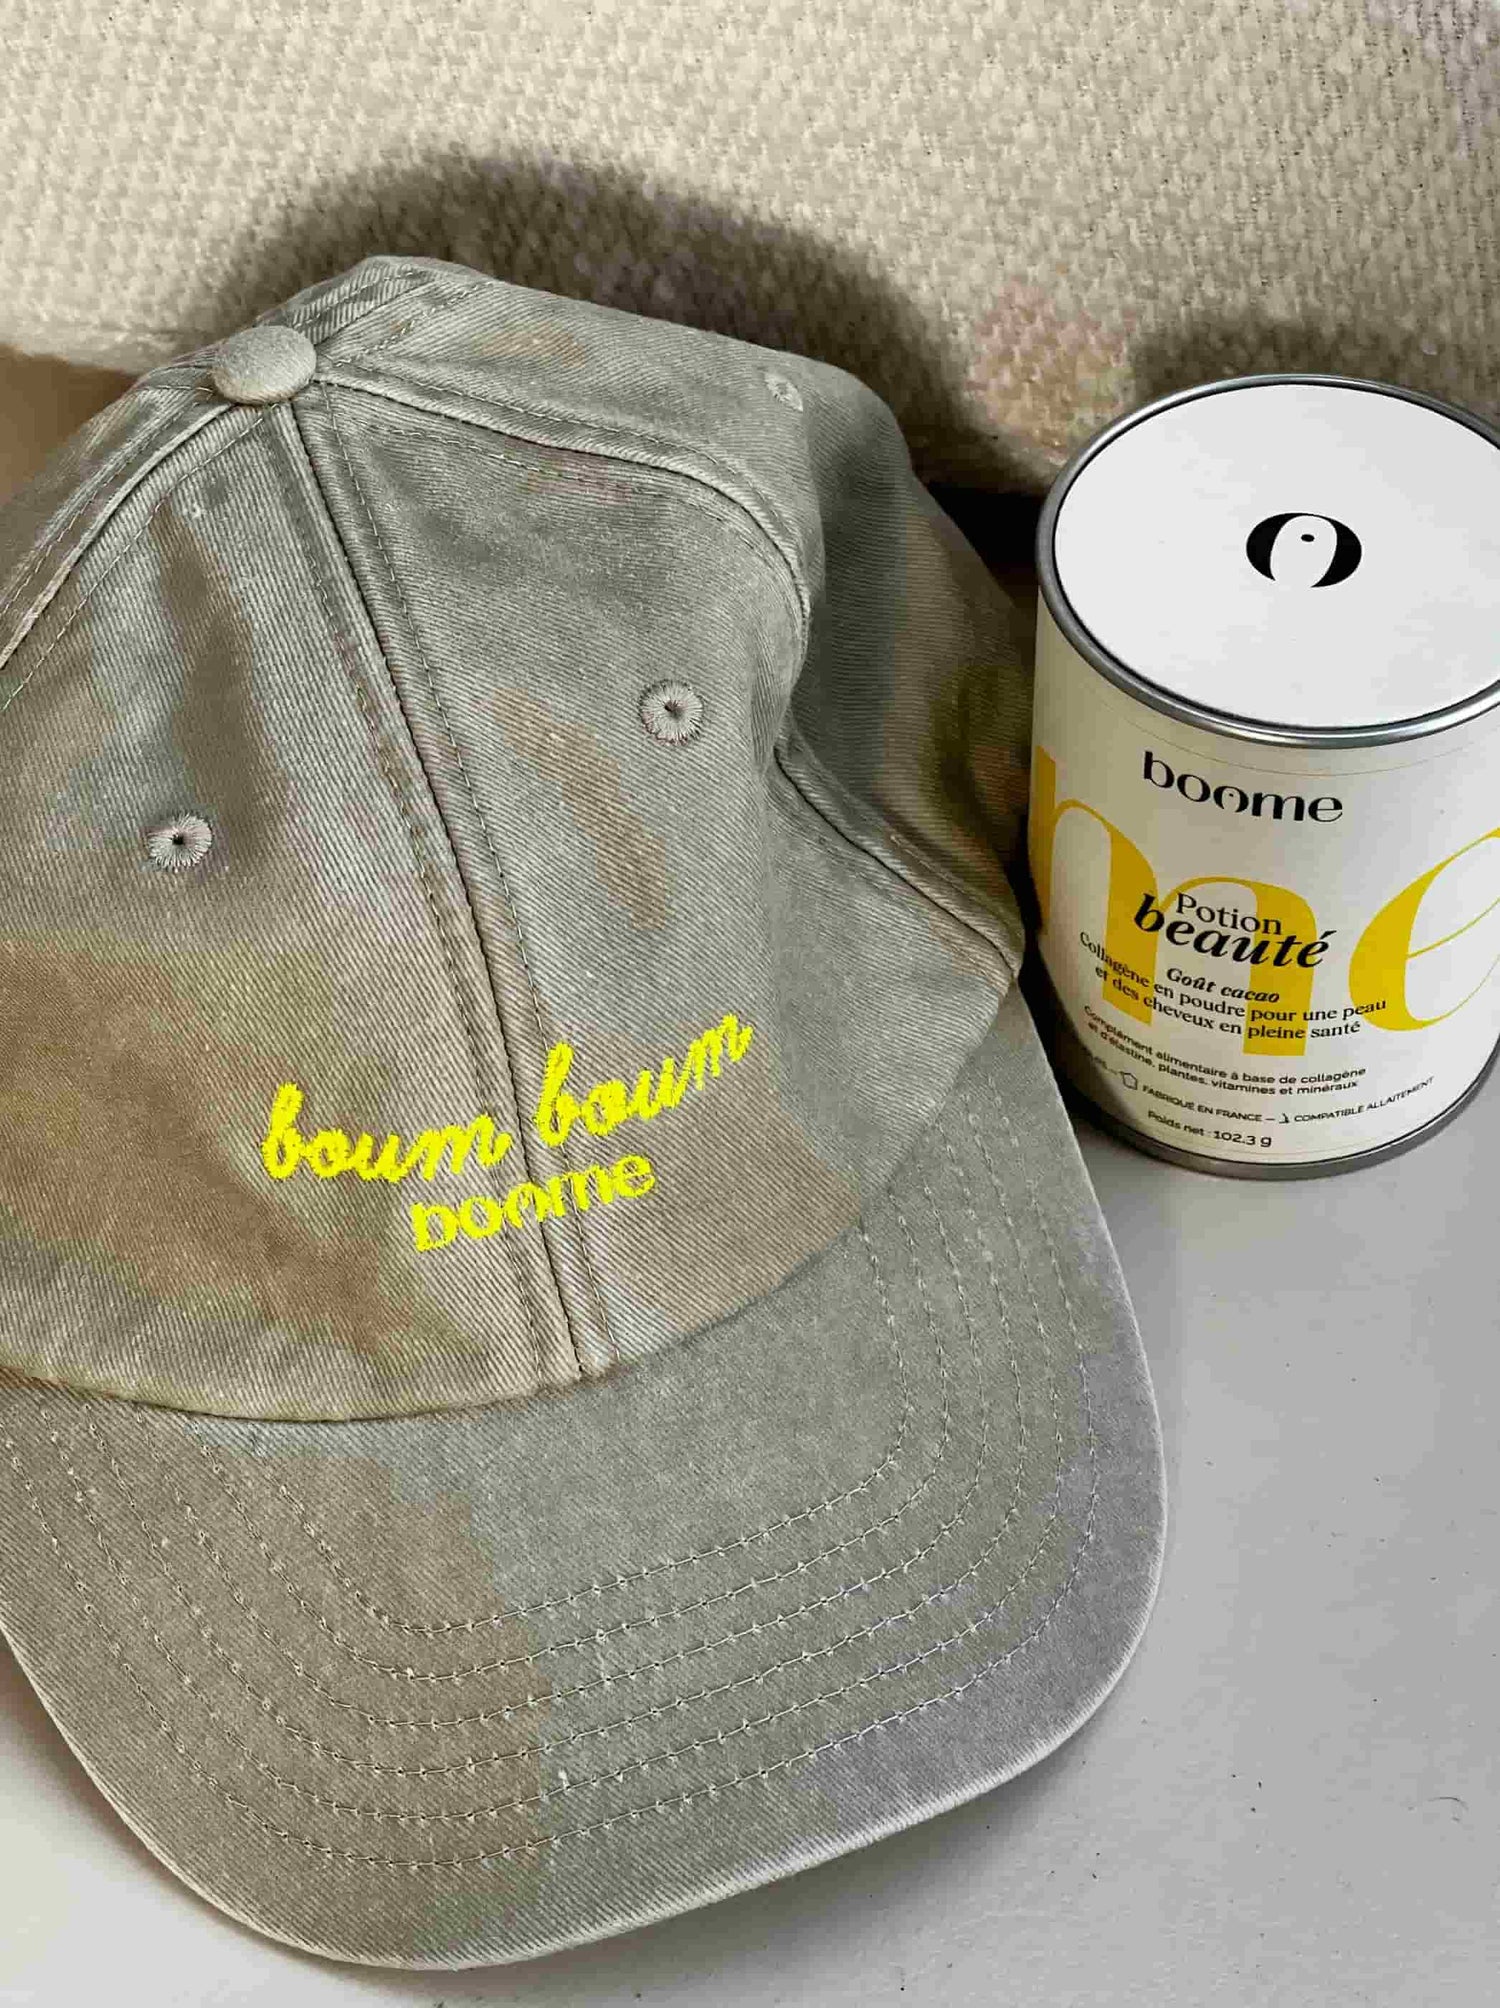 Boome cap - limited edition